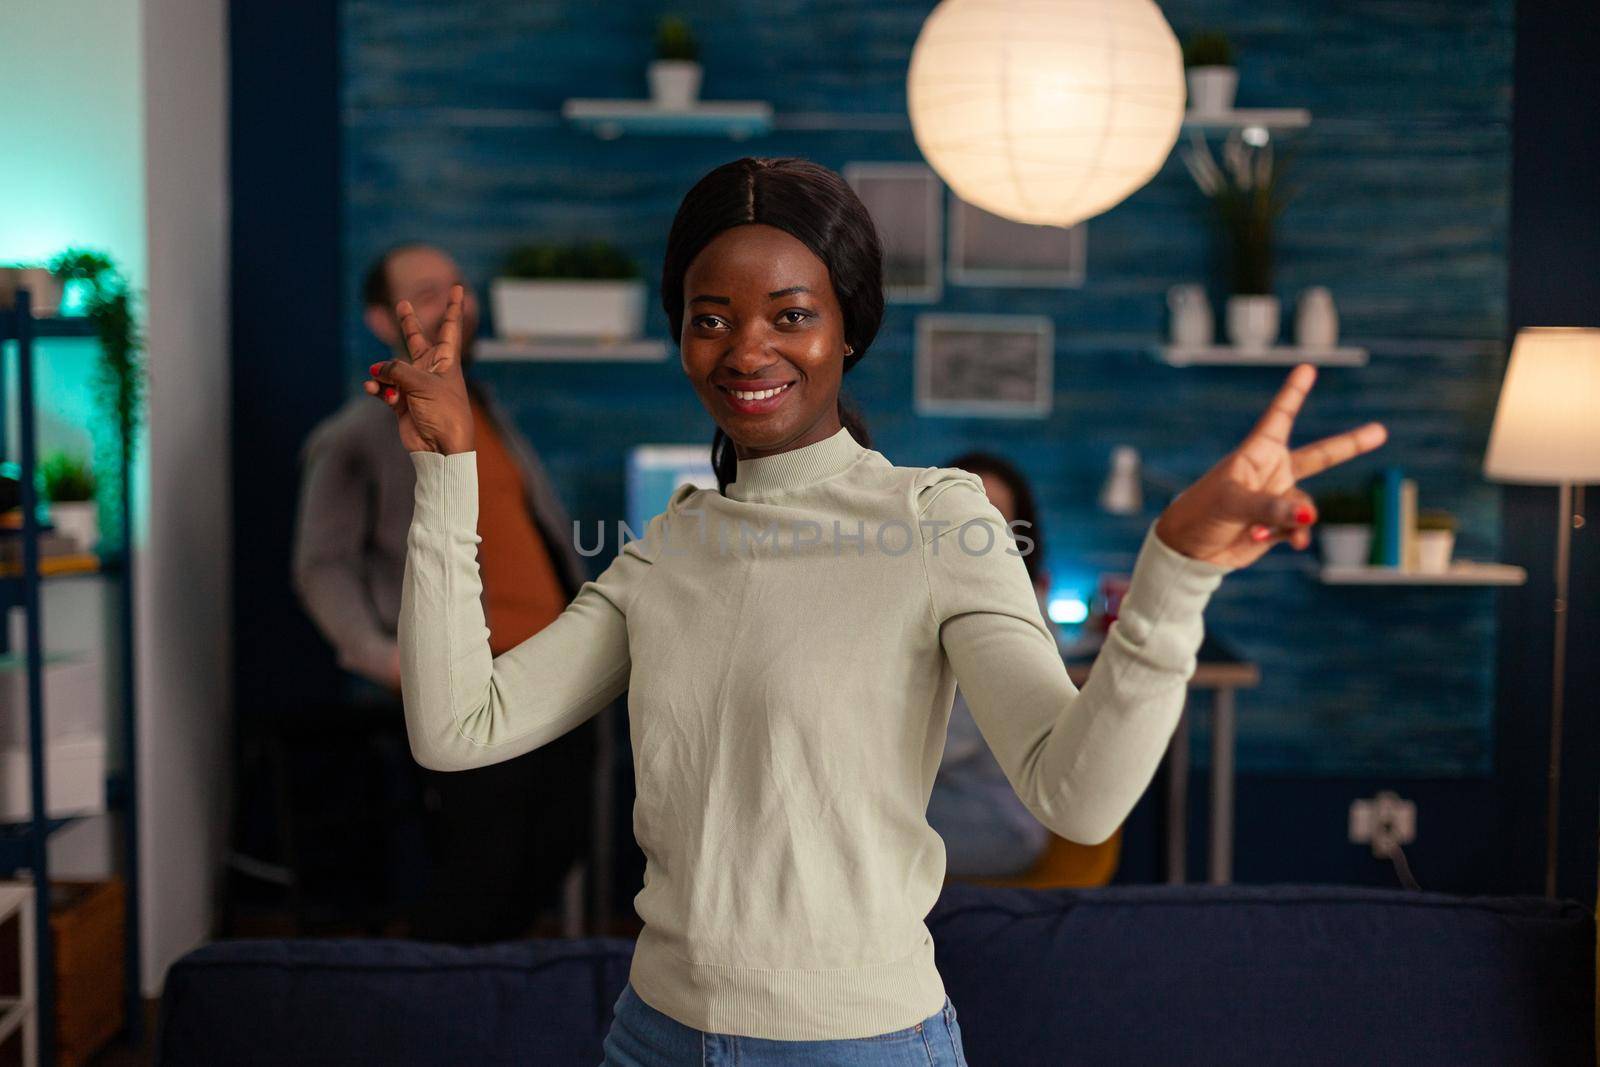 Potrait of afro american woman smiling into camera showing victory hand sign late at night in living room. In background multiethnic friends gathering together having fun during wekeend party.